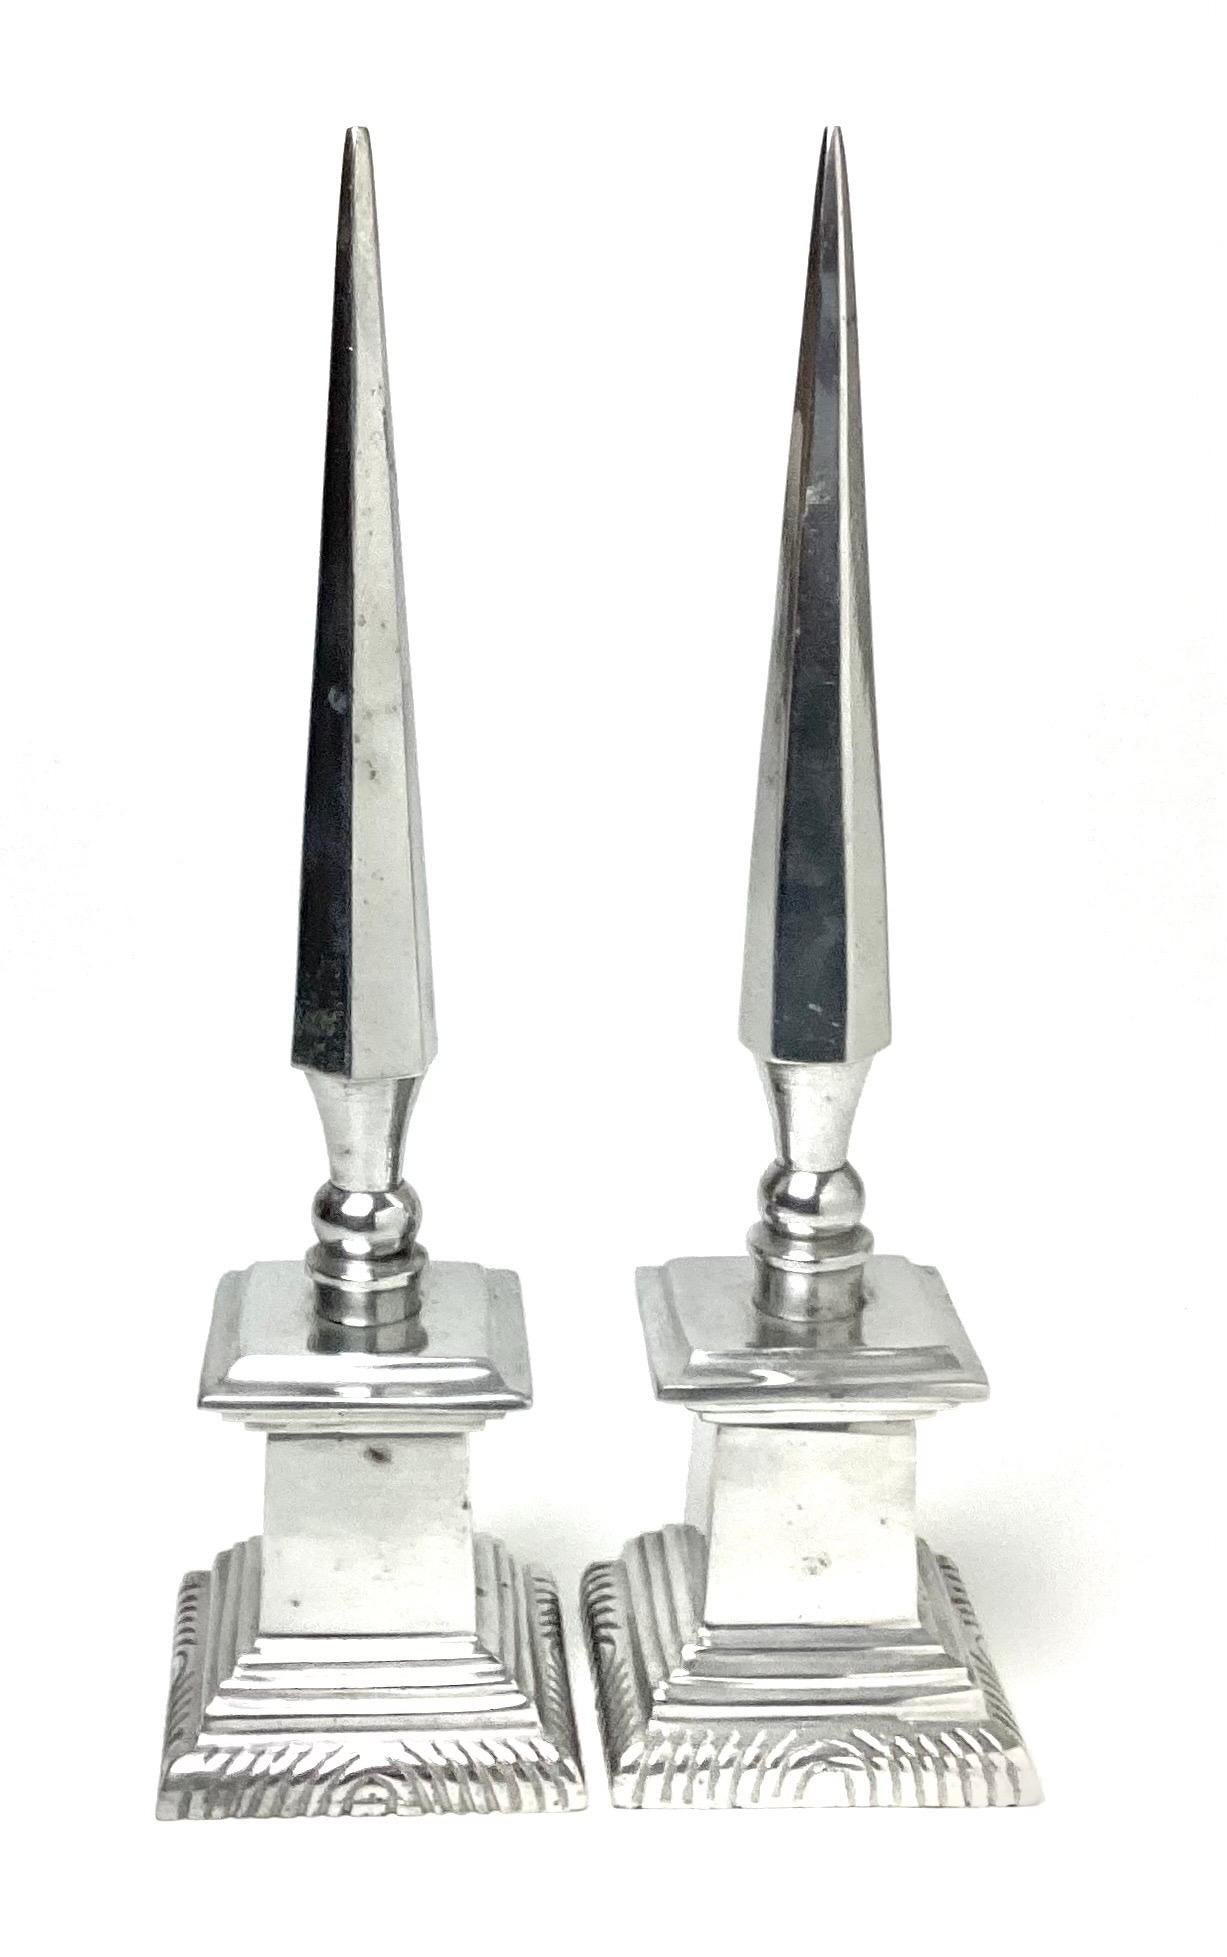 Pair of Neoclassical Polished Aluminum Obelisks. Each is 12 1/2